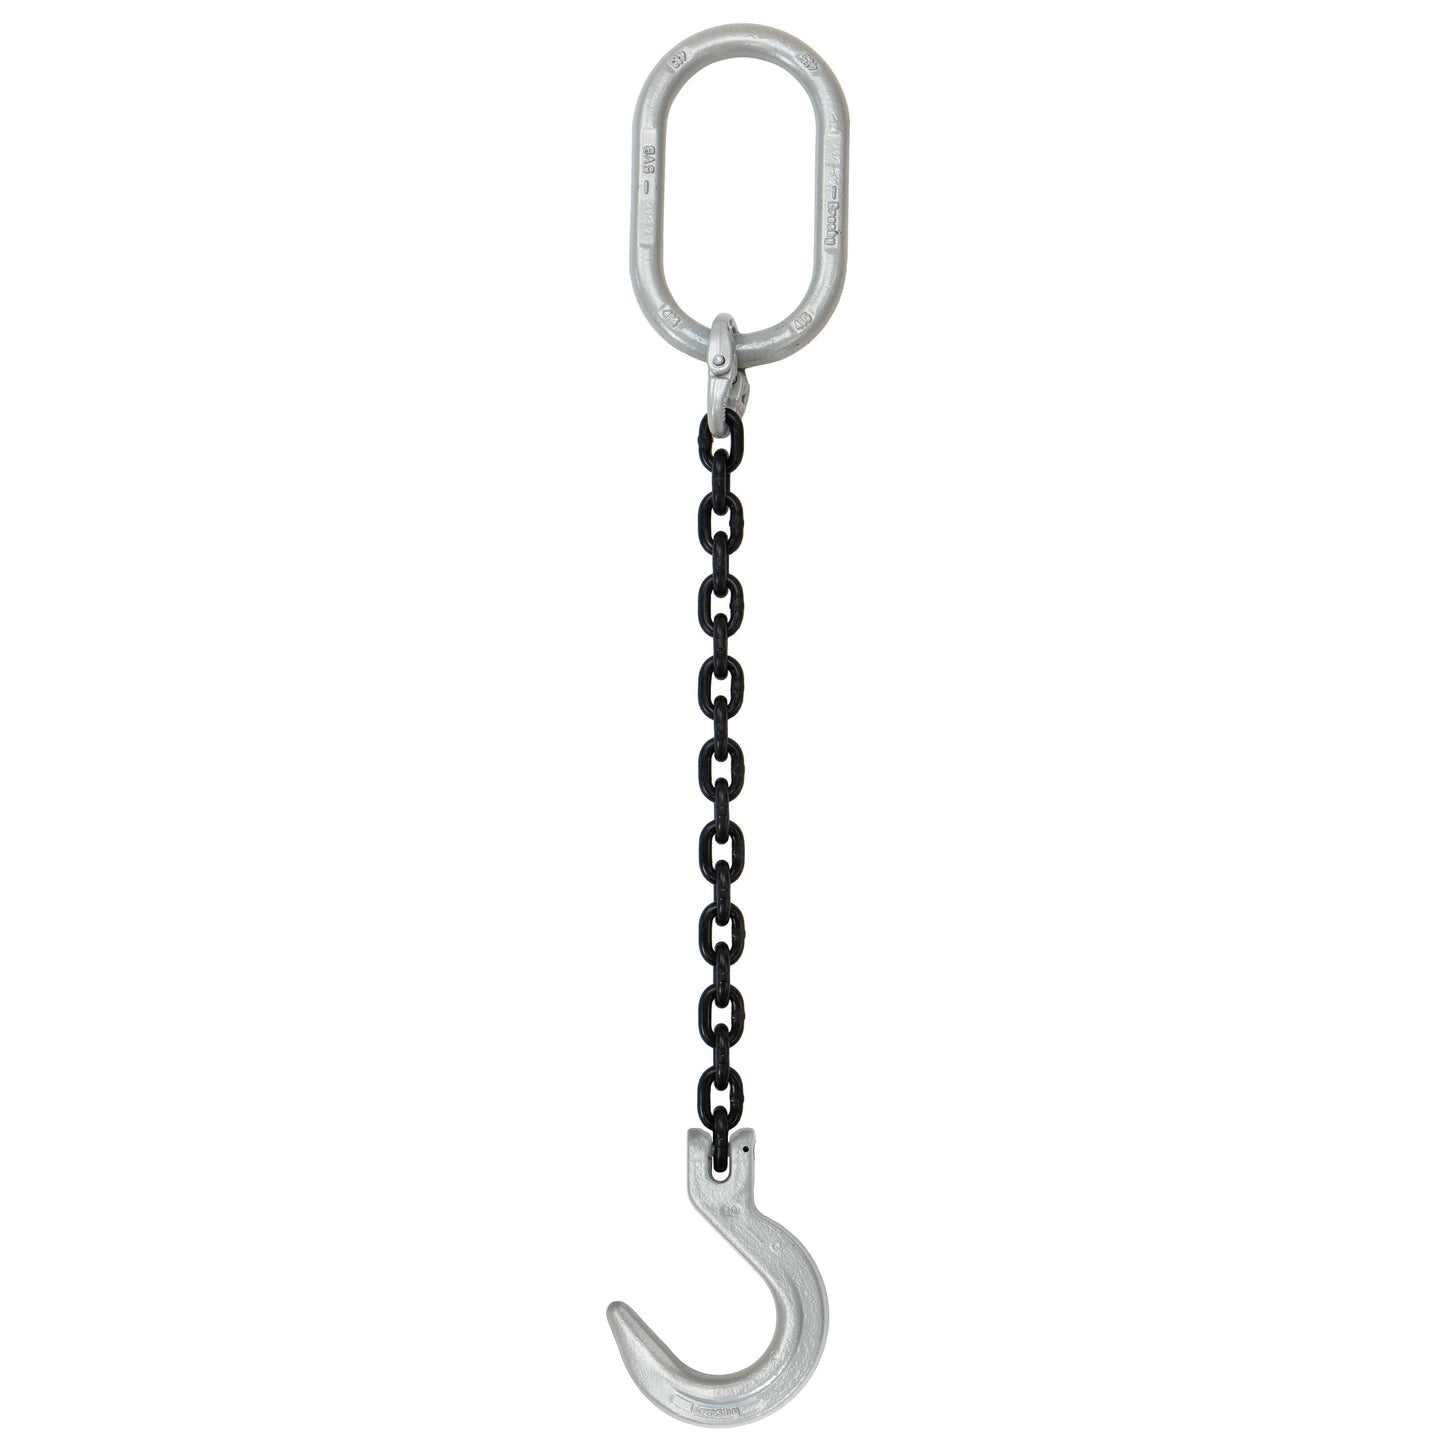 932 inch x 8 foot Domestic Single Leg Chain Sling w Crosby Foundry Hook Grade 100 image 1 of 2